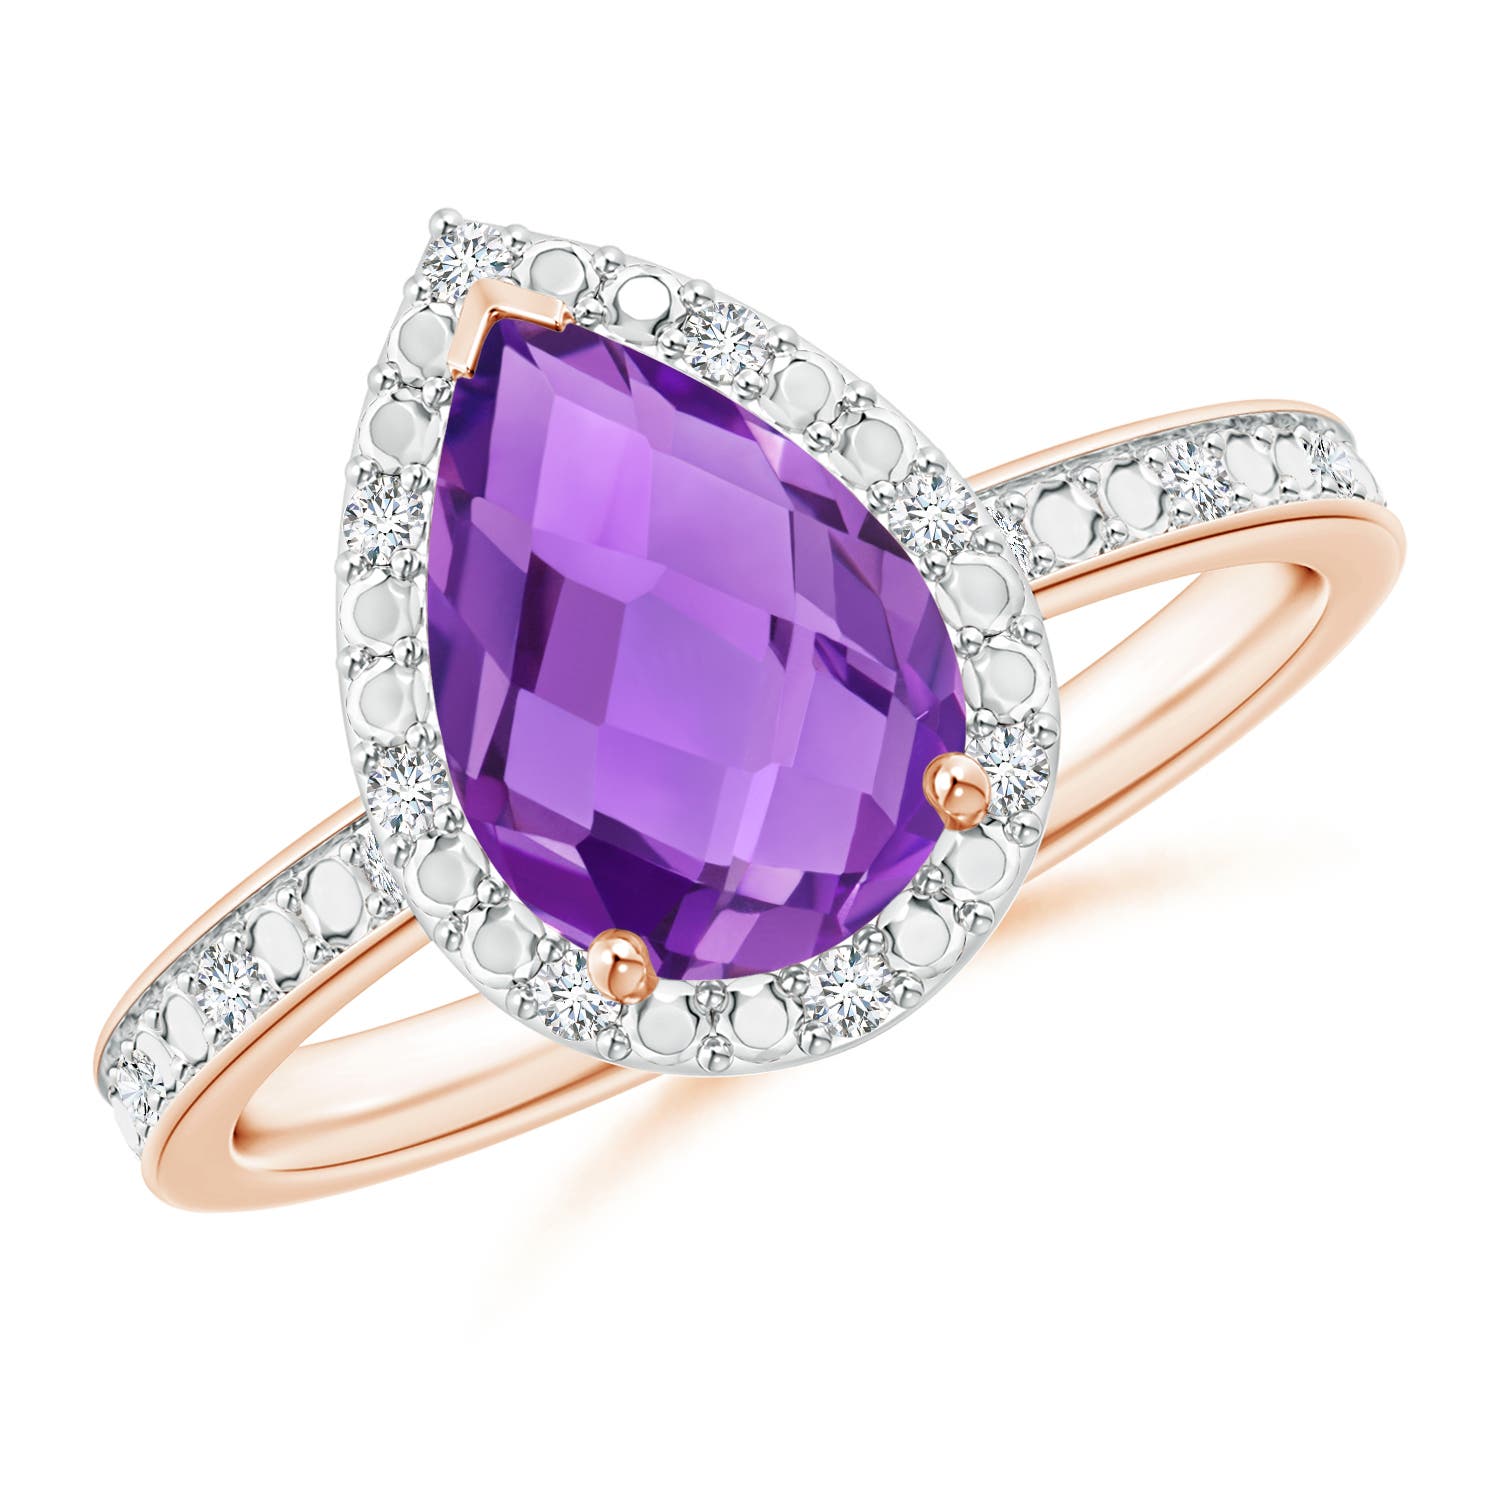 AAA - Amethyst / 1.68 CT / 14 KT Rose Gold